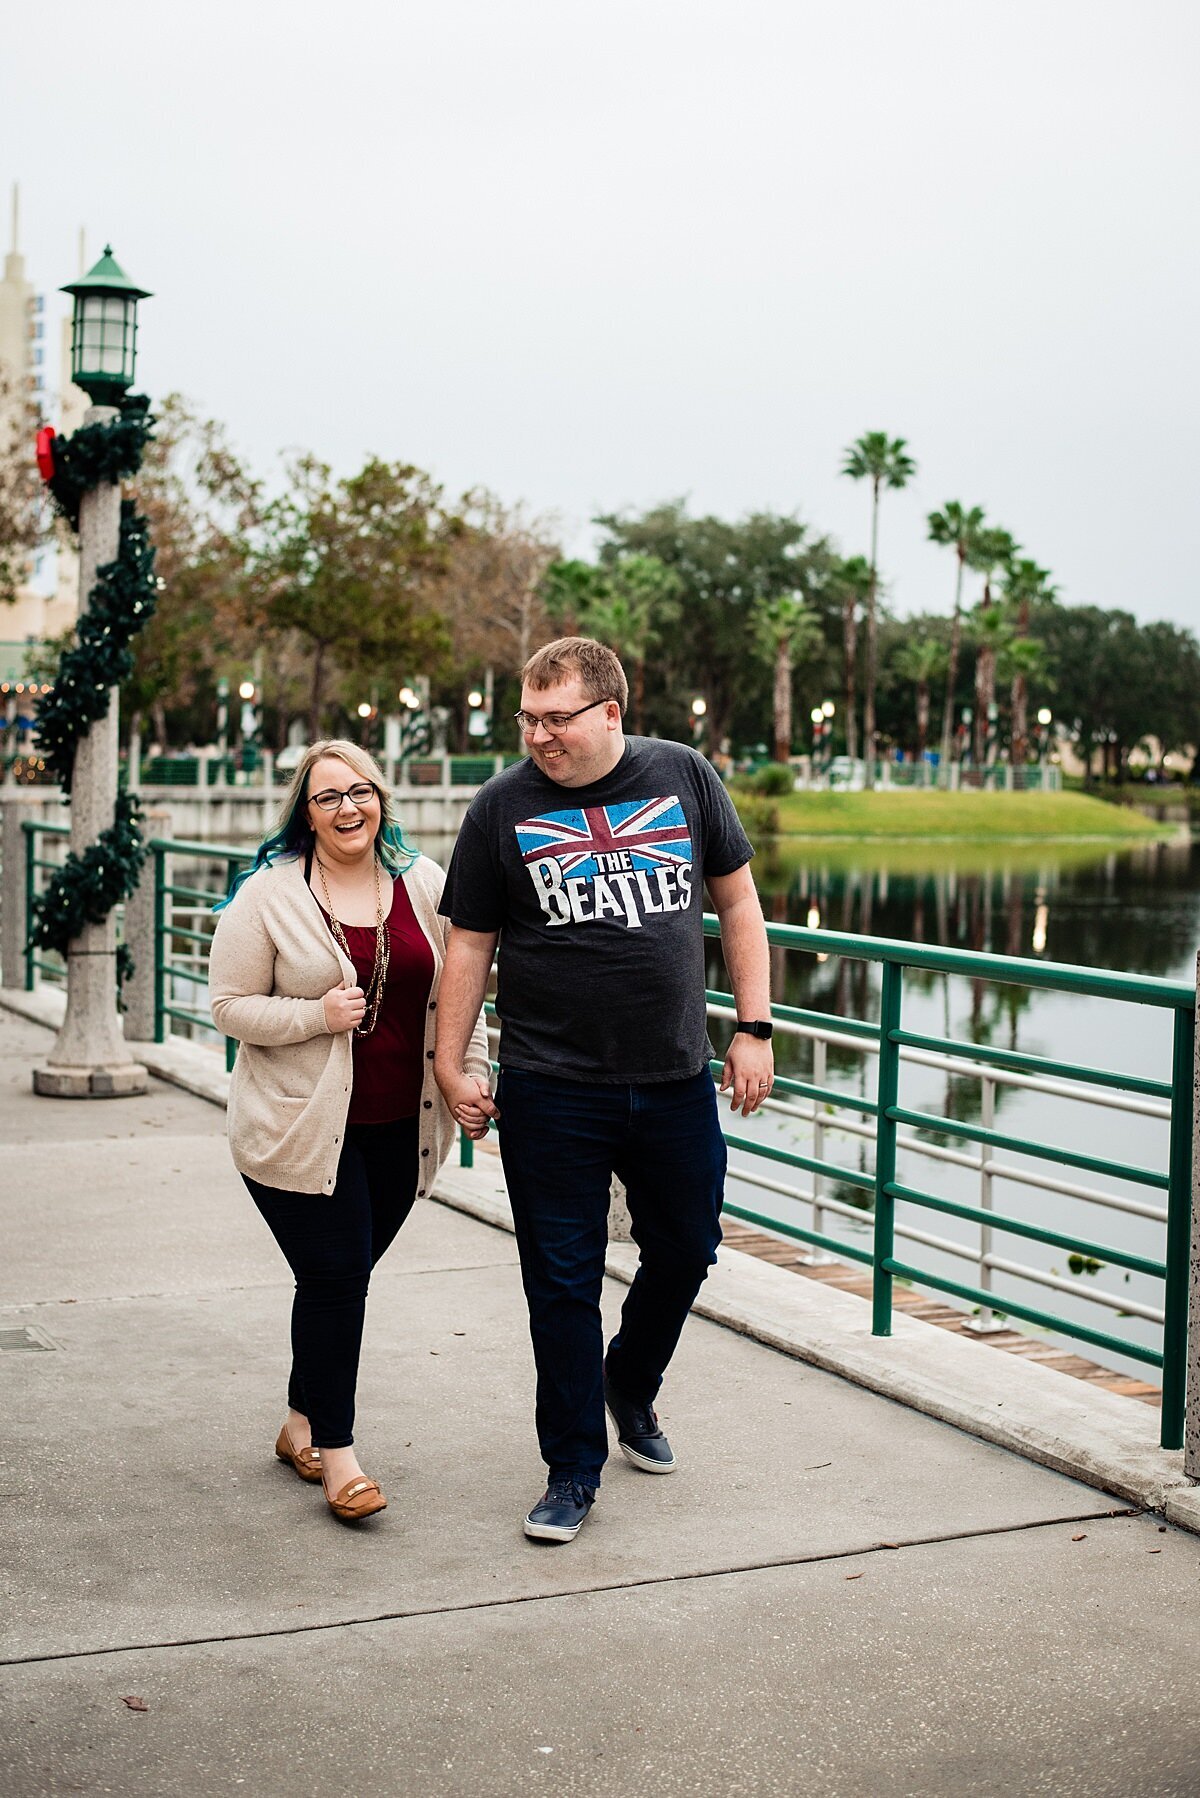 Pat and Mahlia walking together near a lake in Orlando